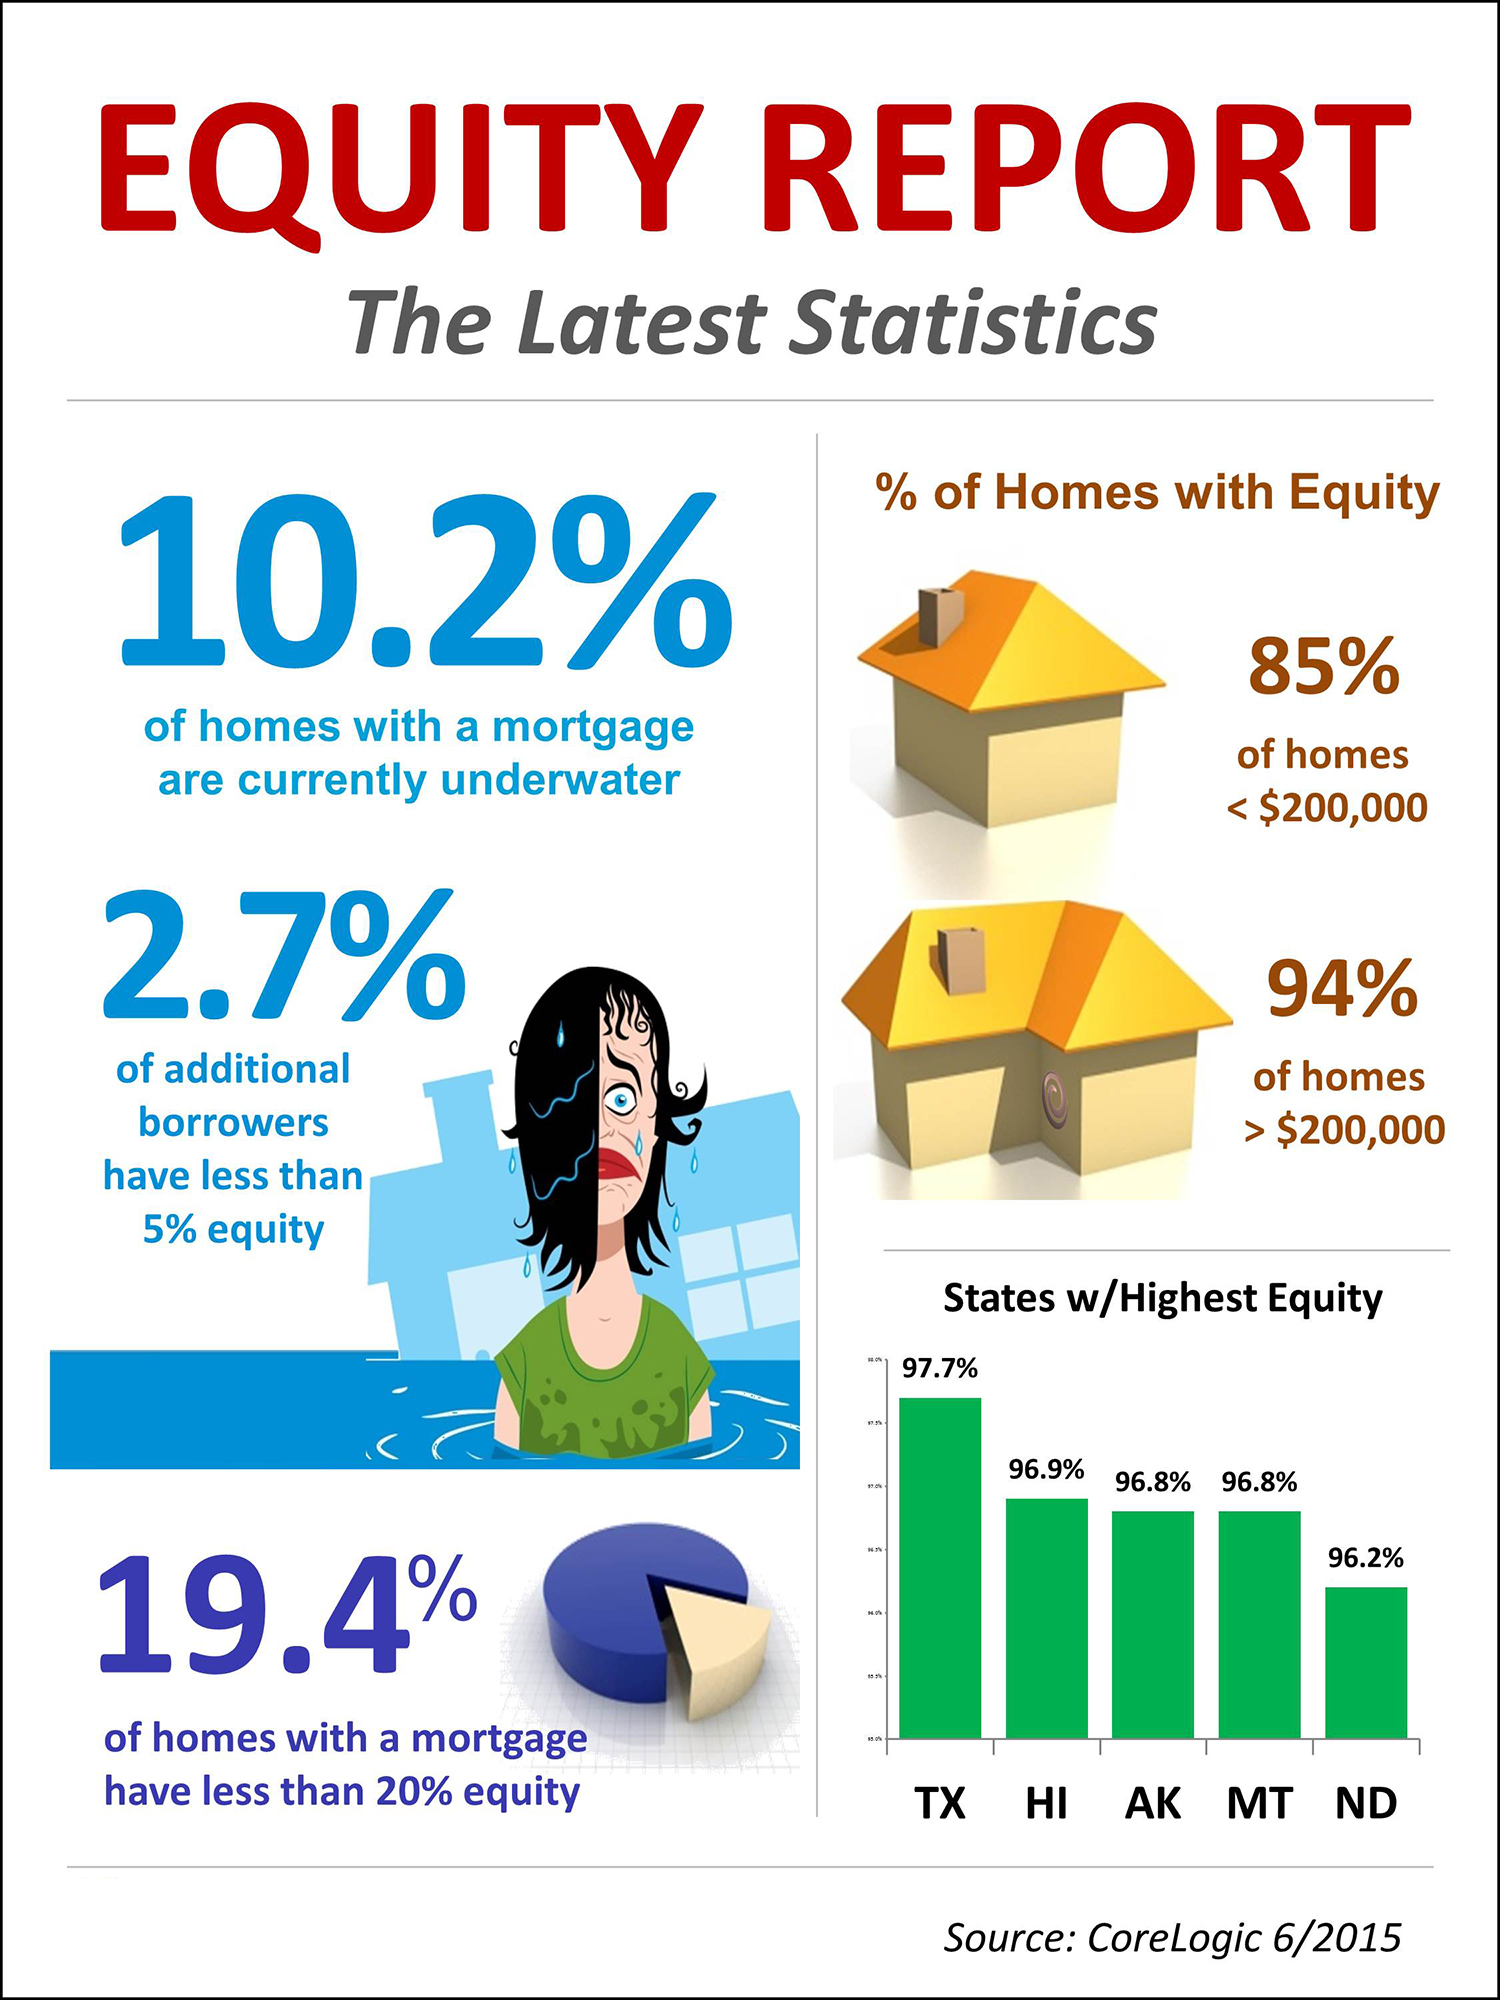 Equity Report [INFOGRAPHIC] | Simplifying The Market